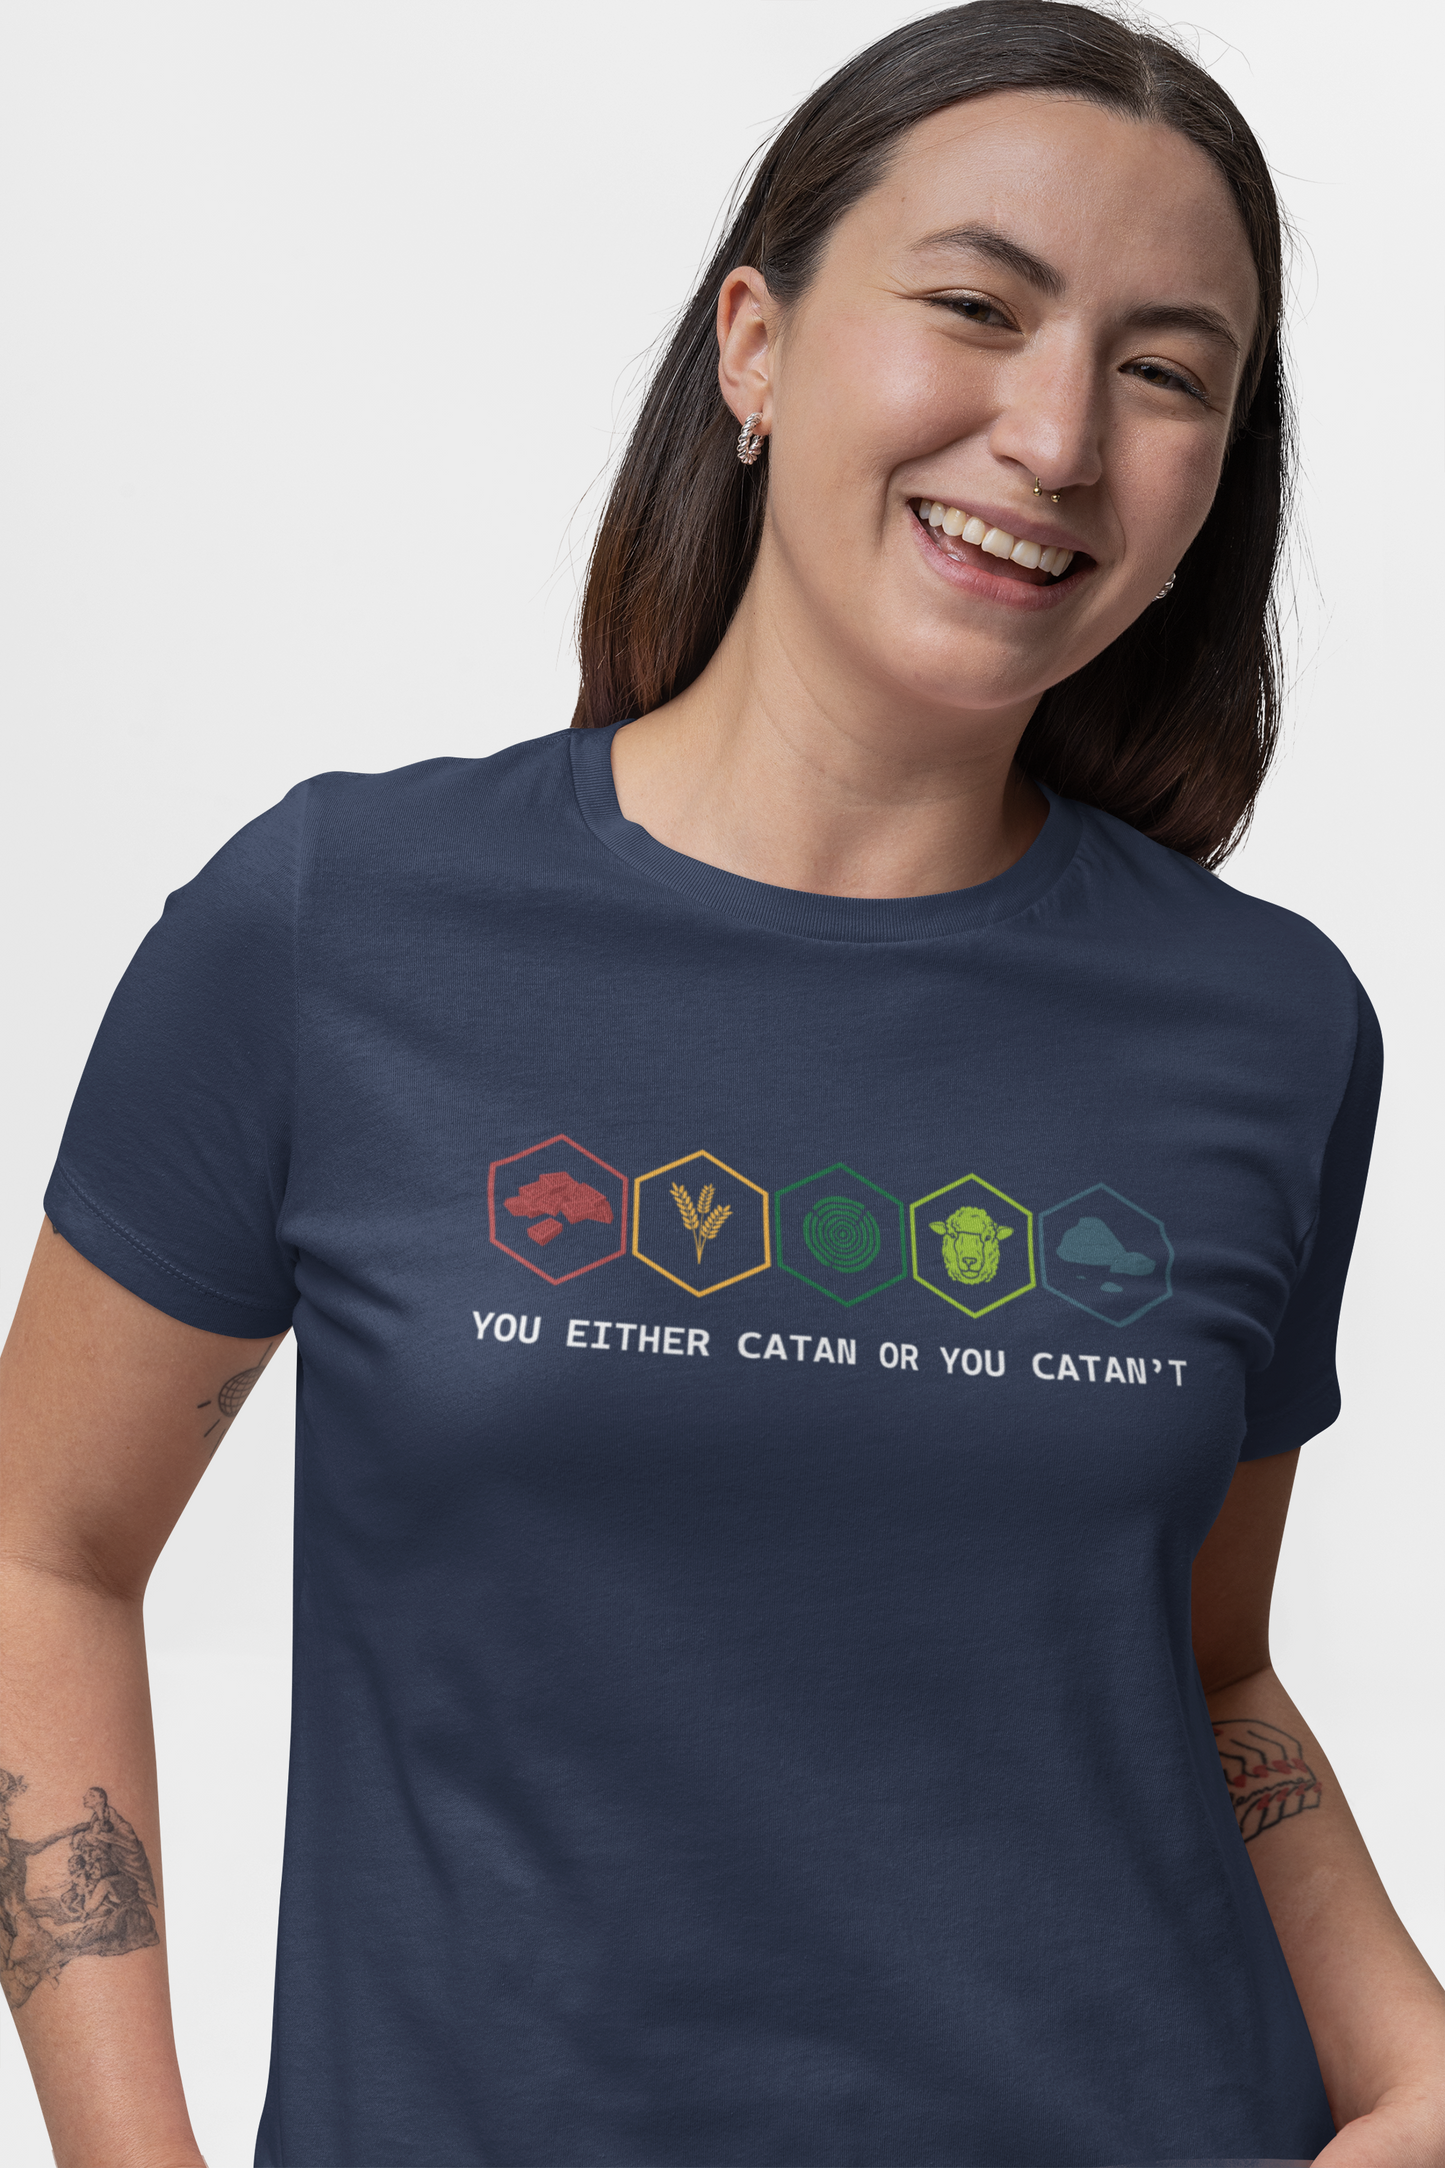 You Either Catan or You Catan't | Settlers of Catan | Catan Unisex T Shirt | Board Games